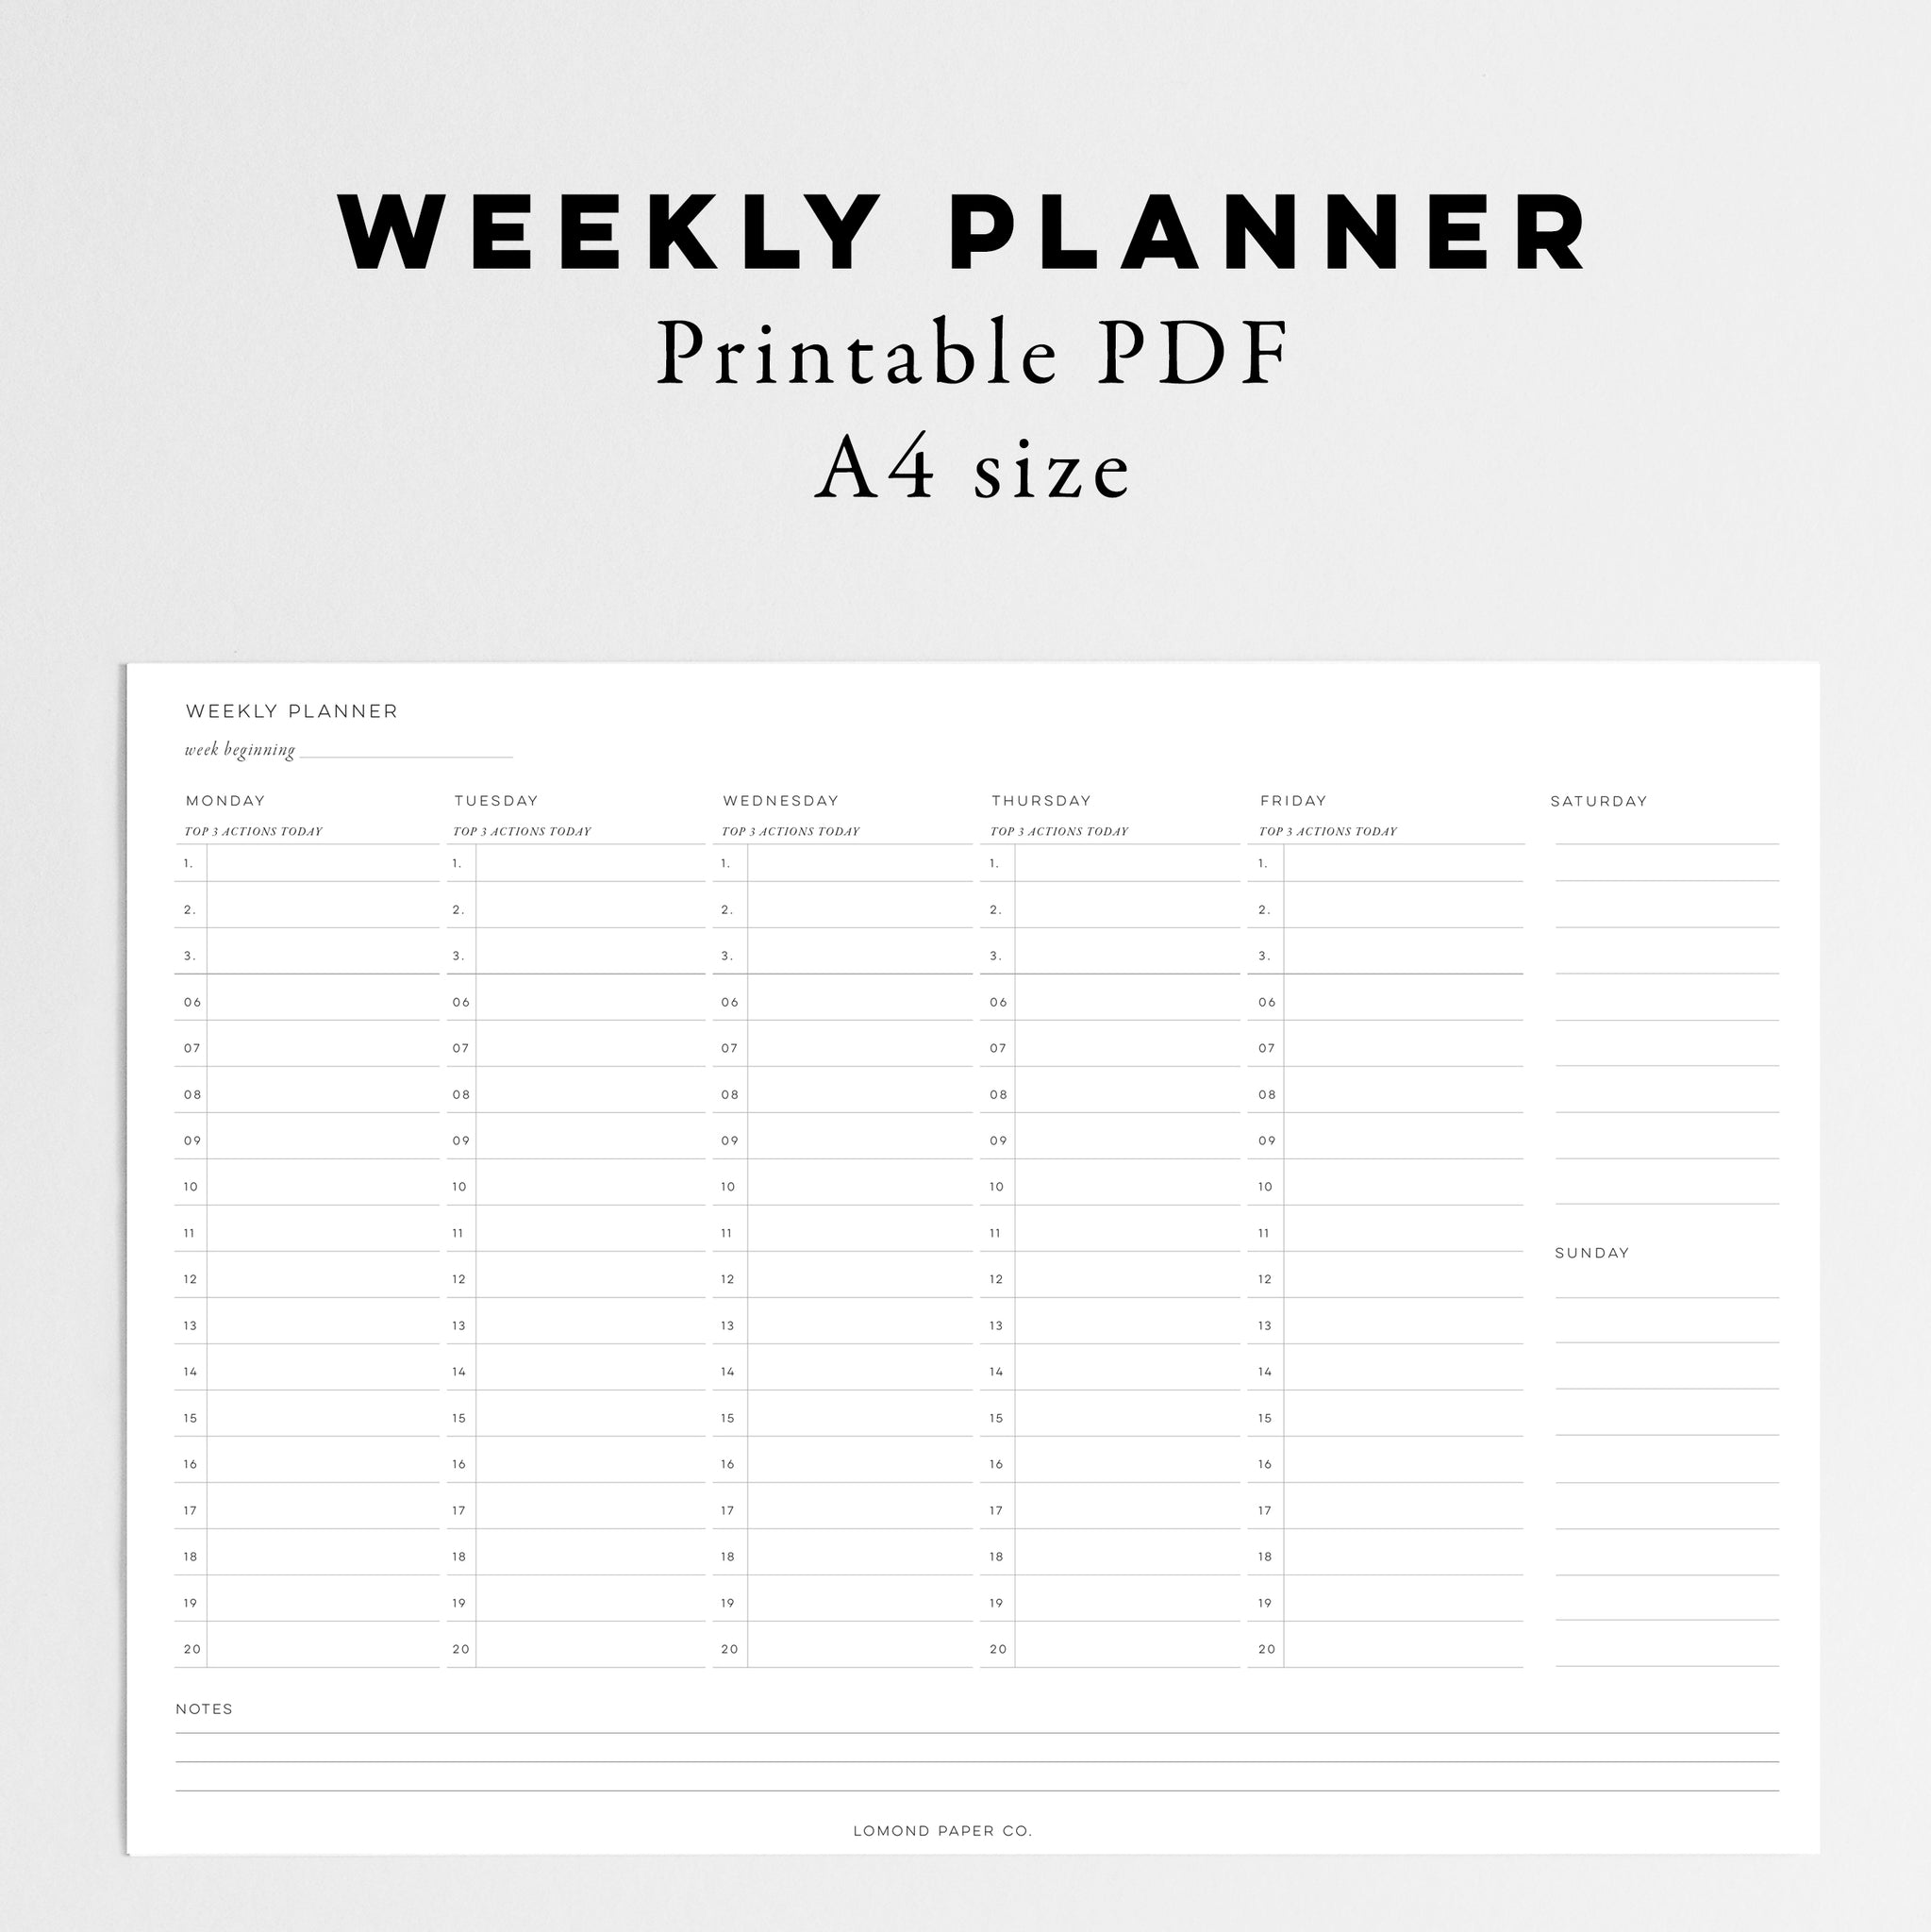 a4-weekly-planner-instant-download-lomond-paper-co